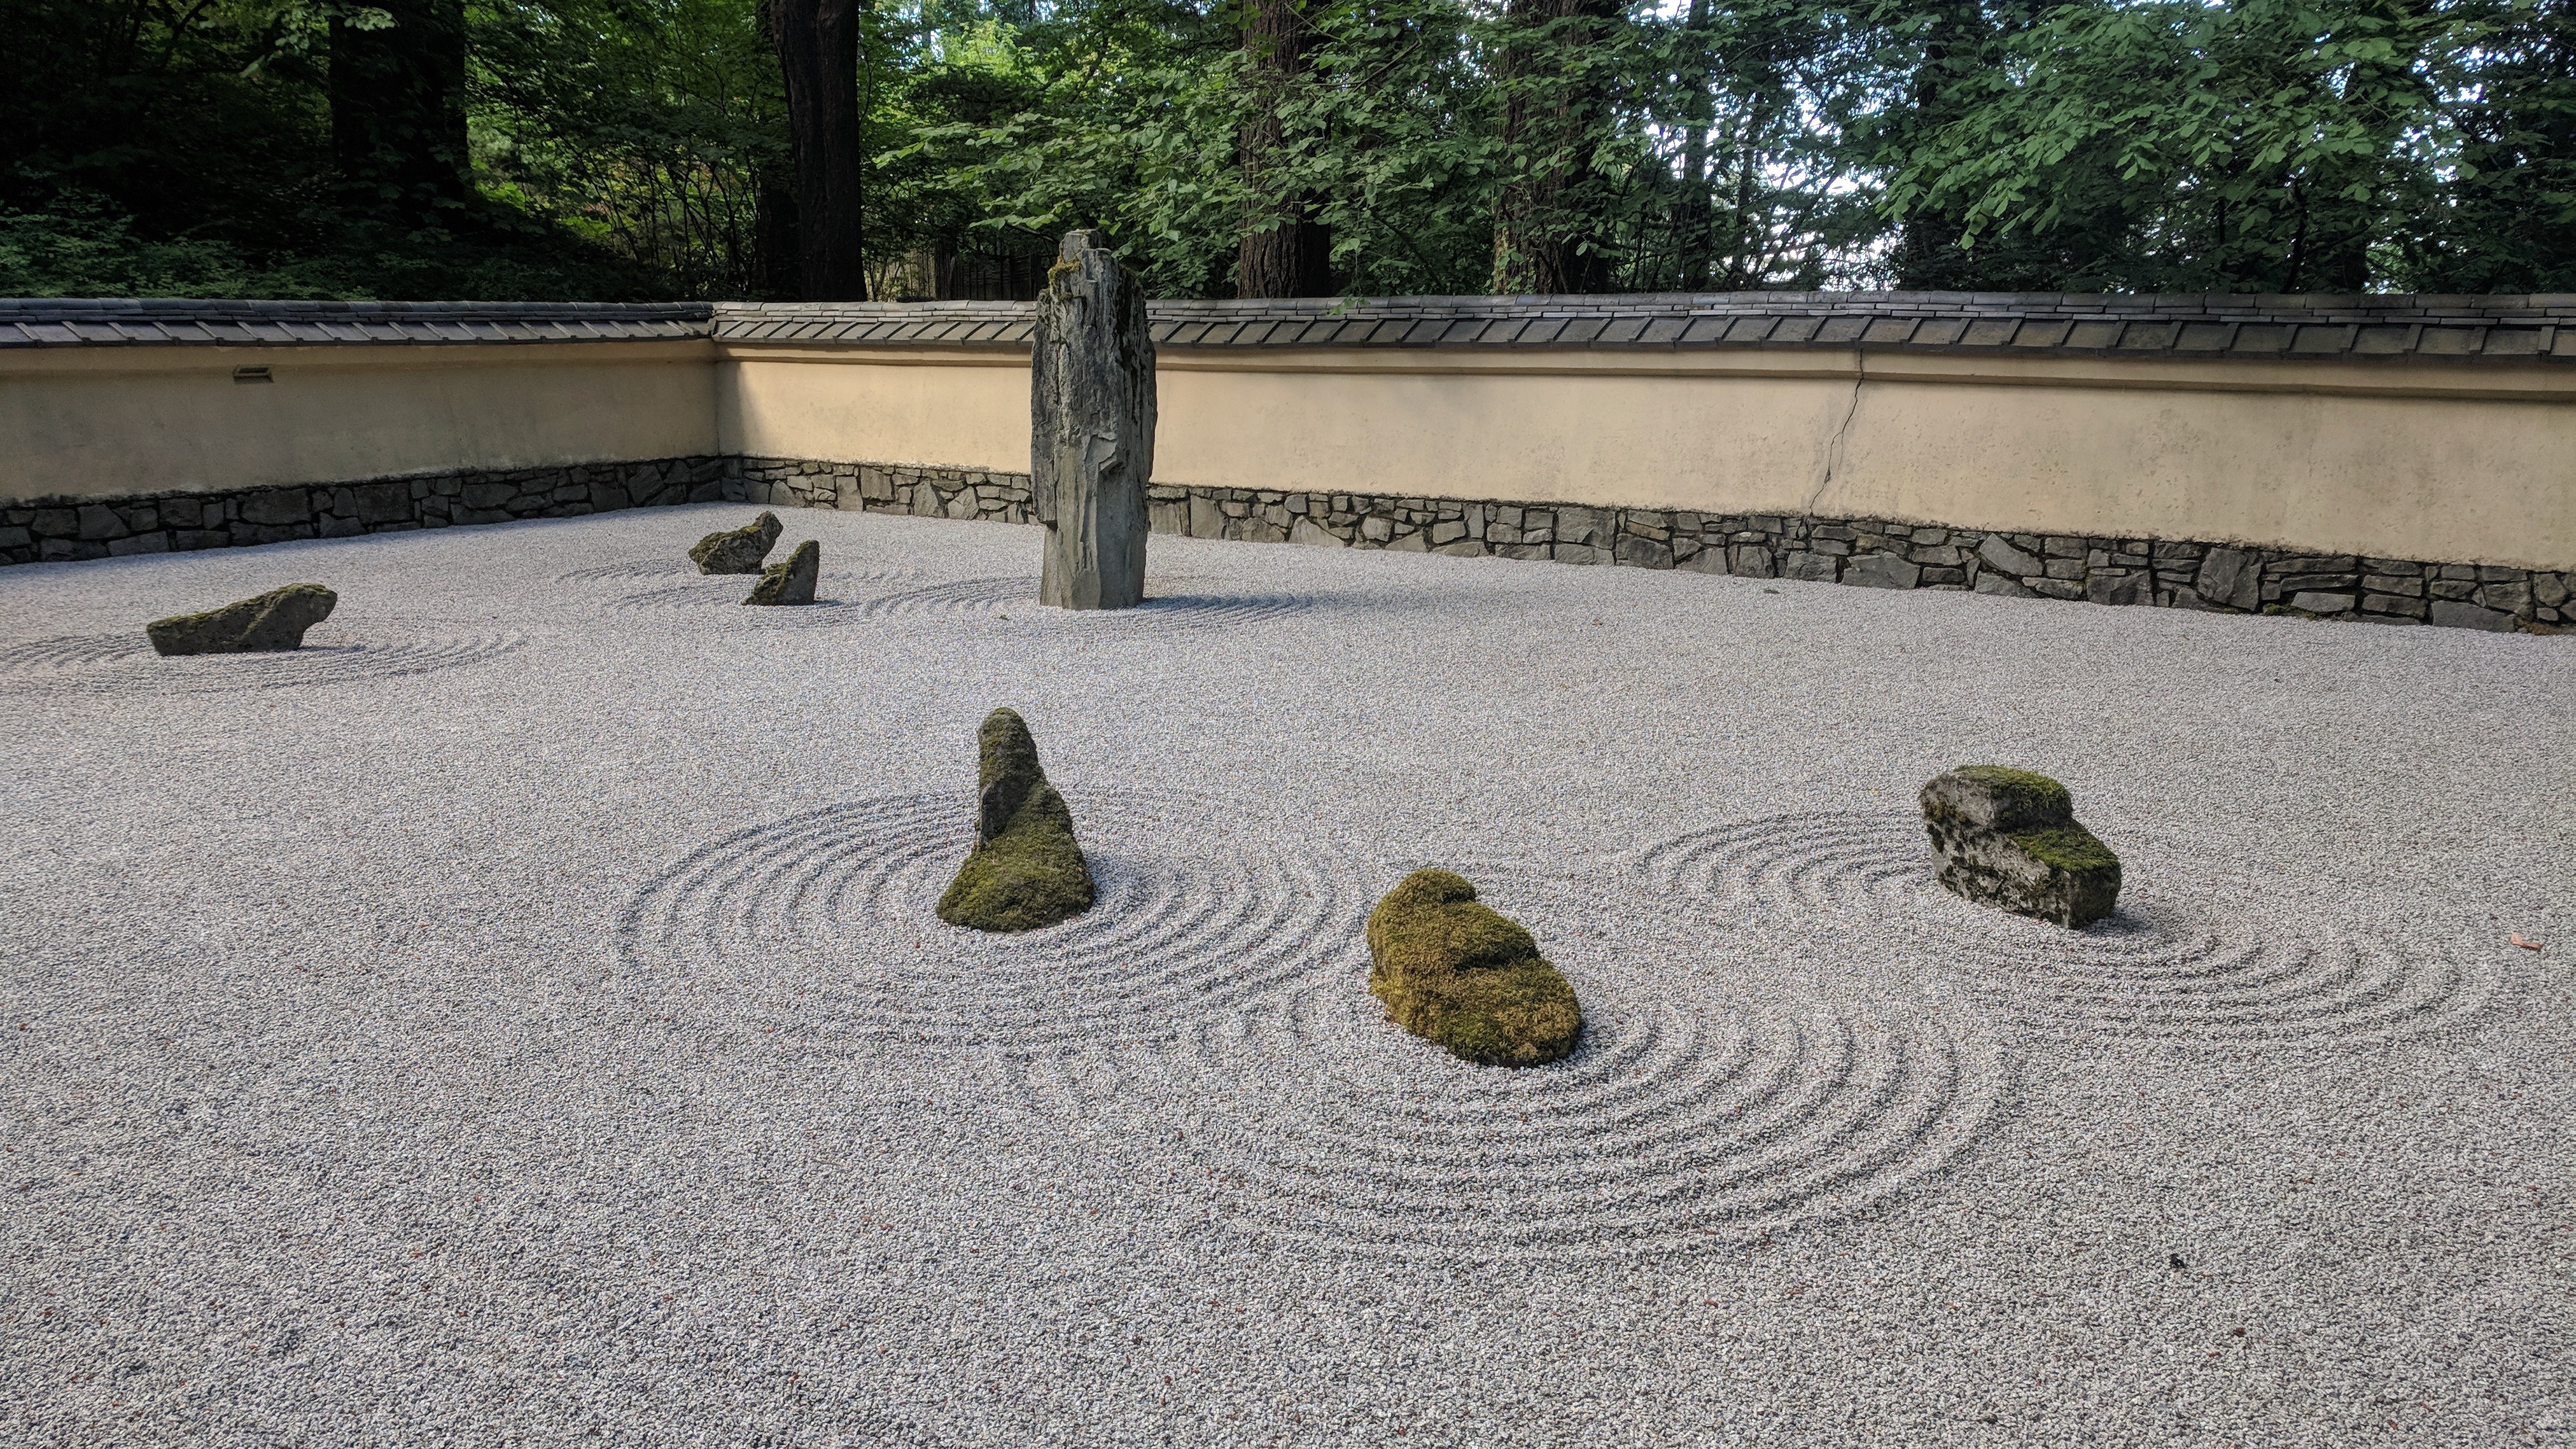 The Sand and Stone Garden at the Portland Japanese Garden